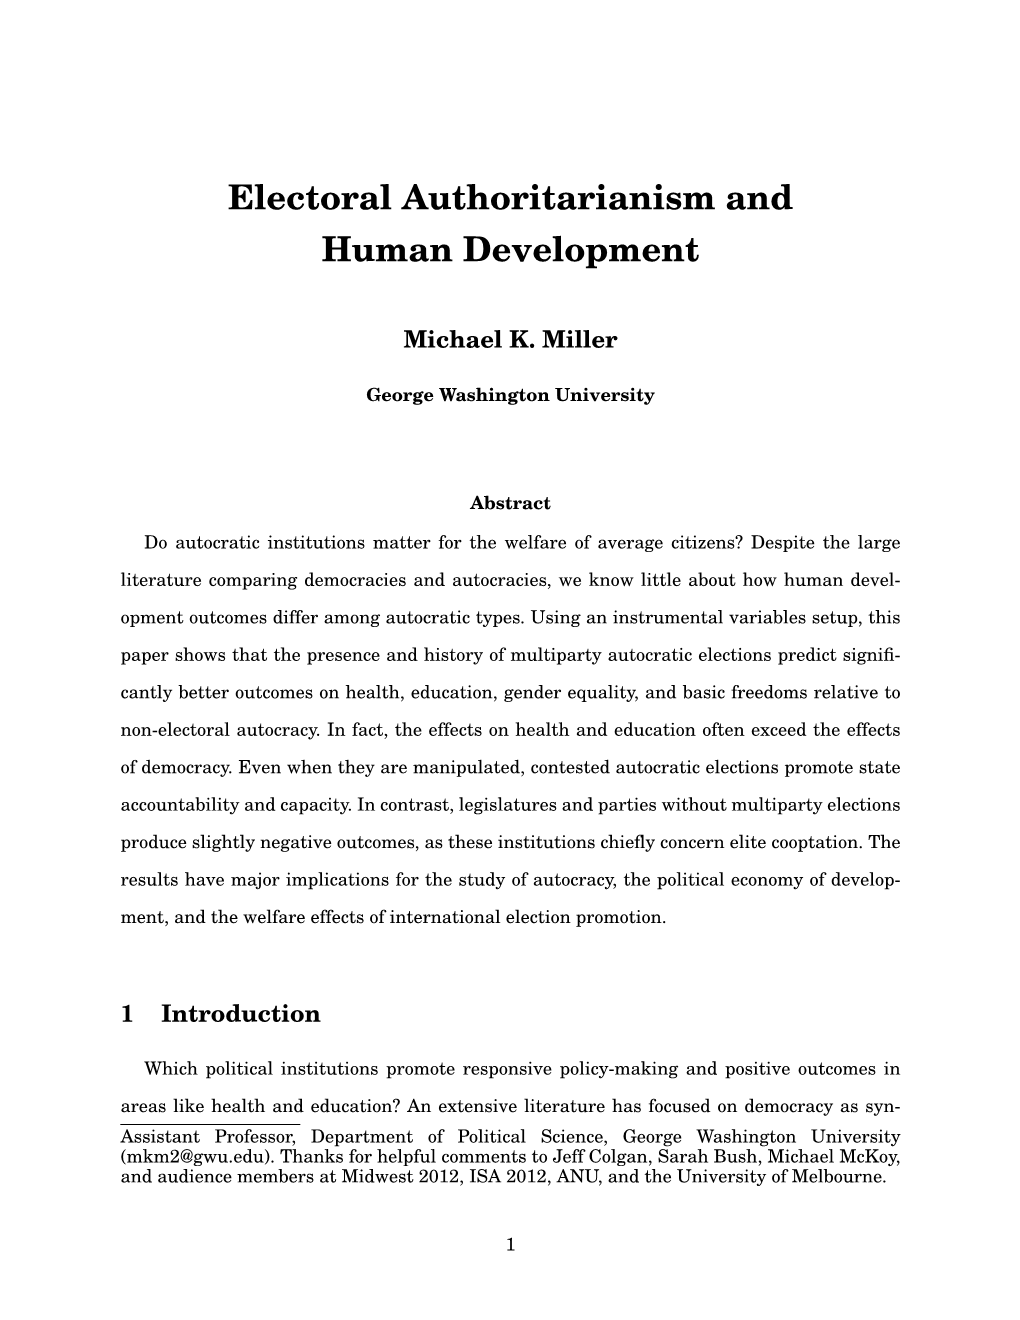 Electoral Authoritarianism and Human Development